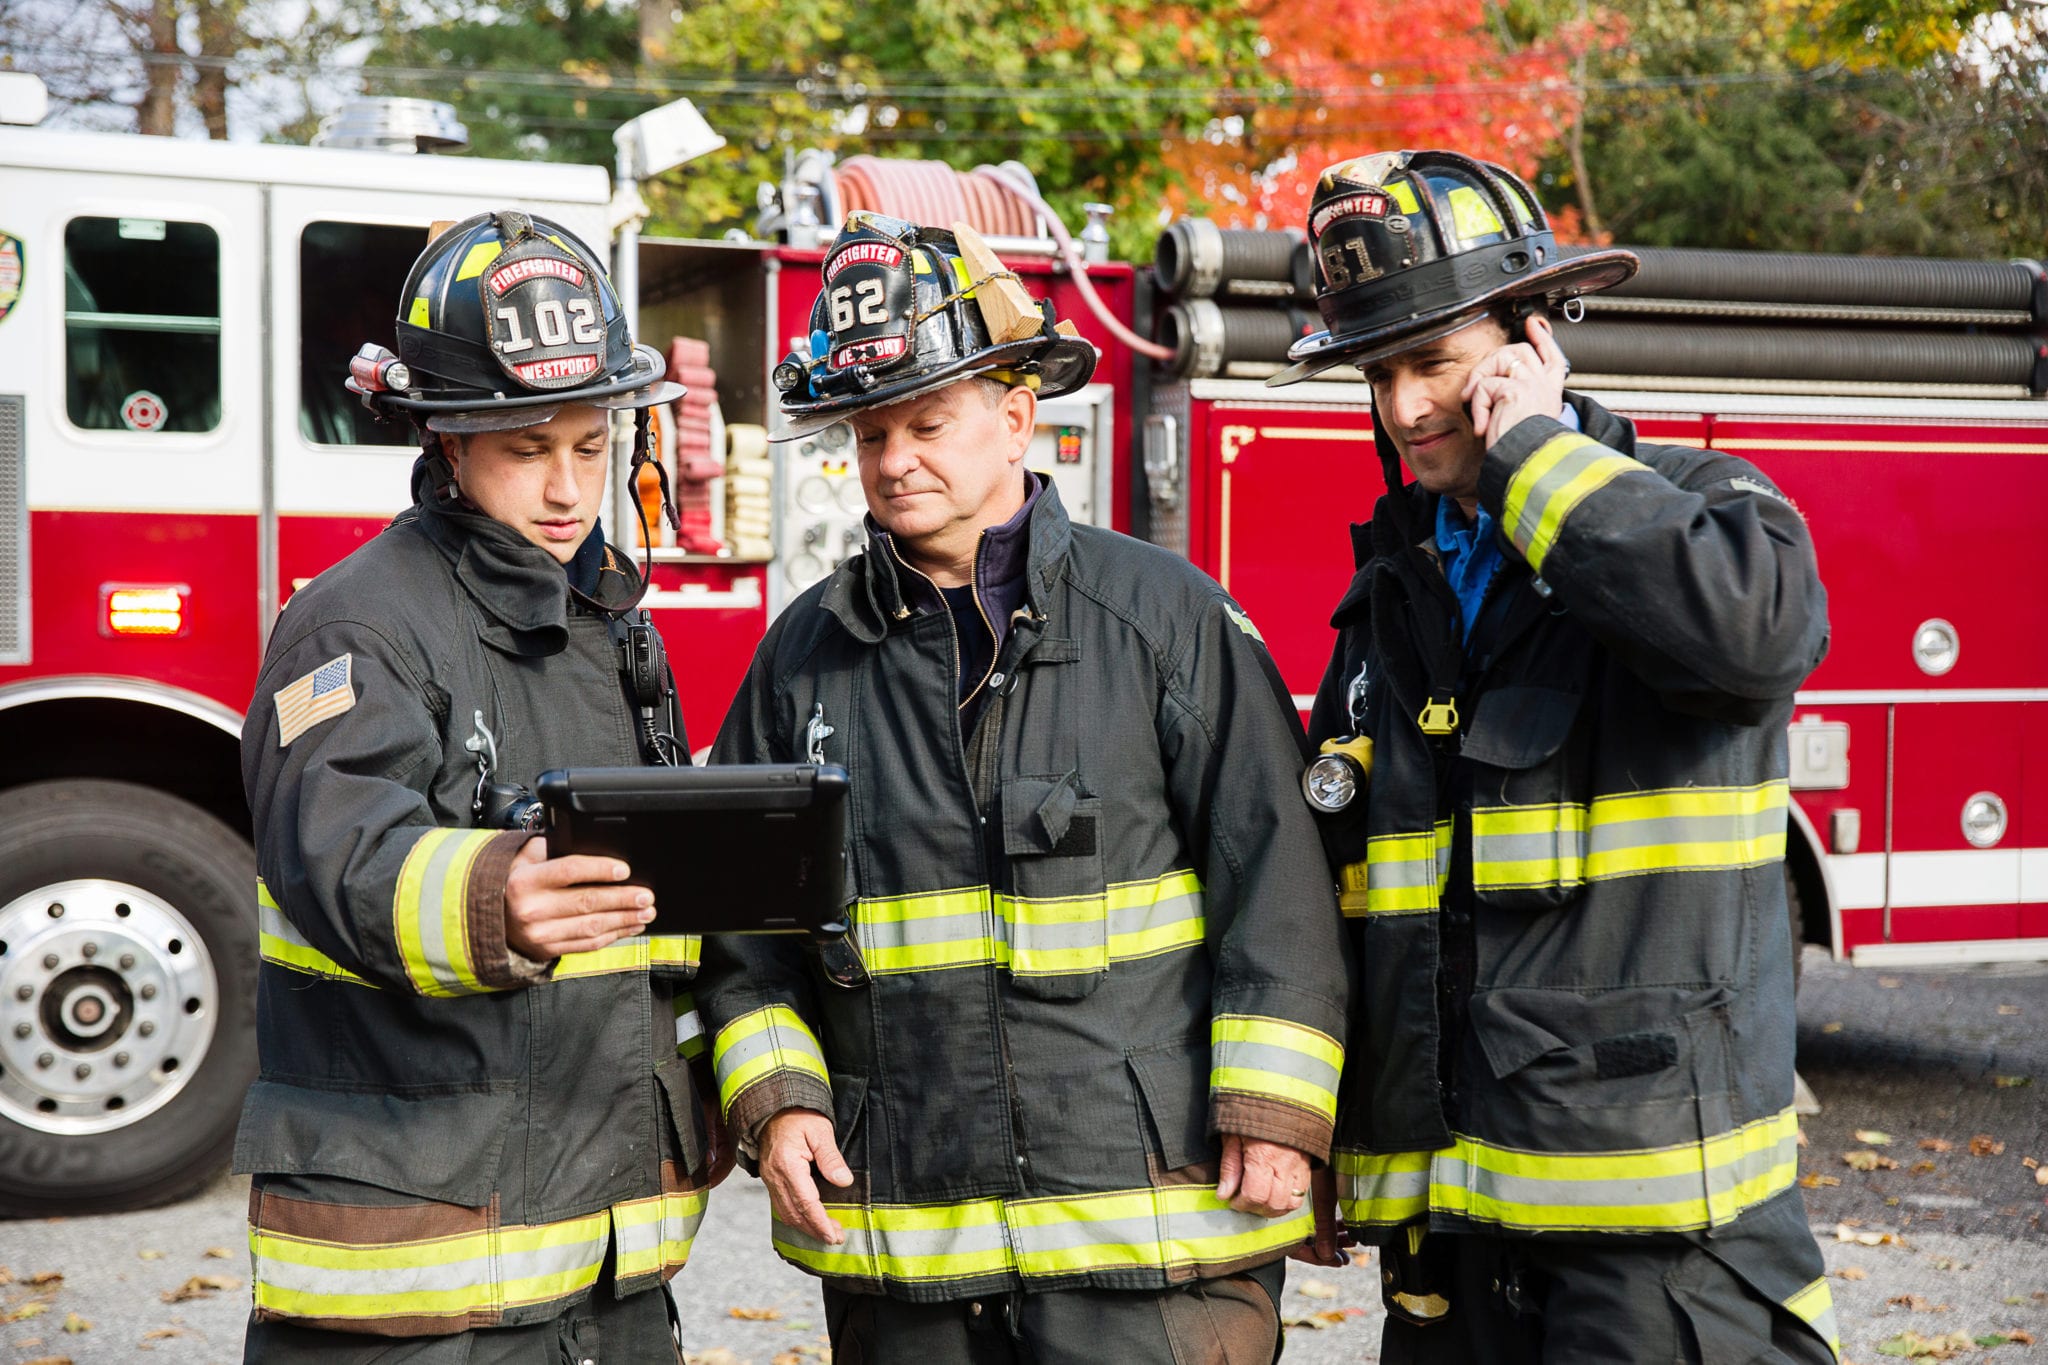 AT&T Firemen using digital tablet while other fireman talking on mobile phone